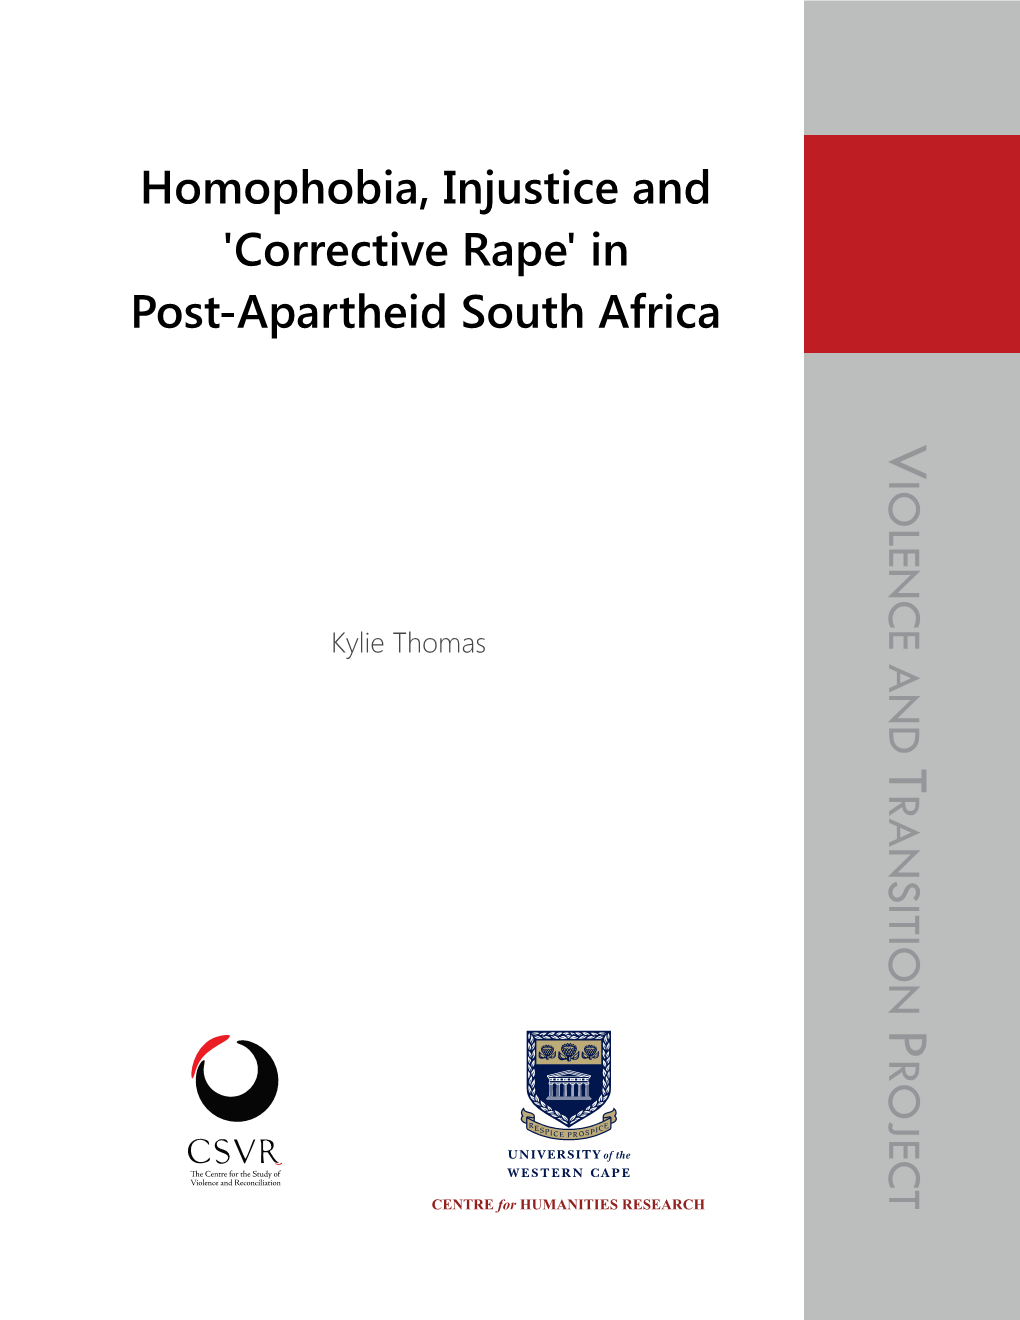 Homophobia, Injustice and Corrective Rape in South Africa